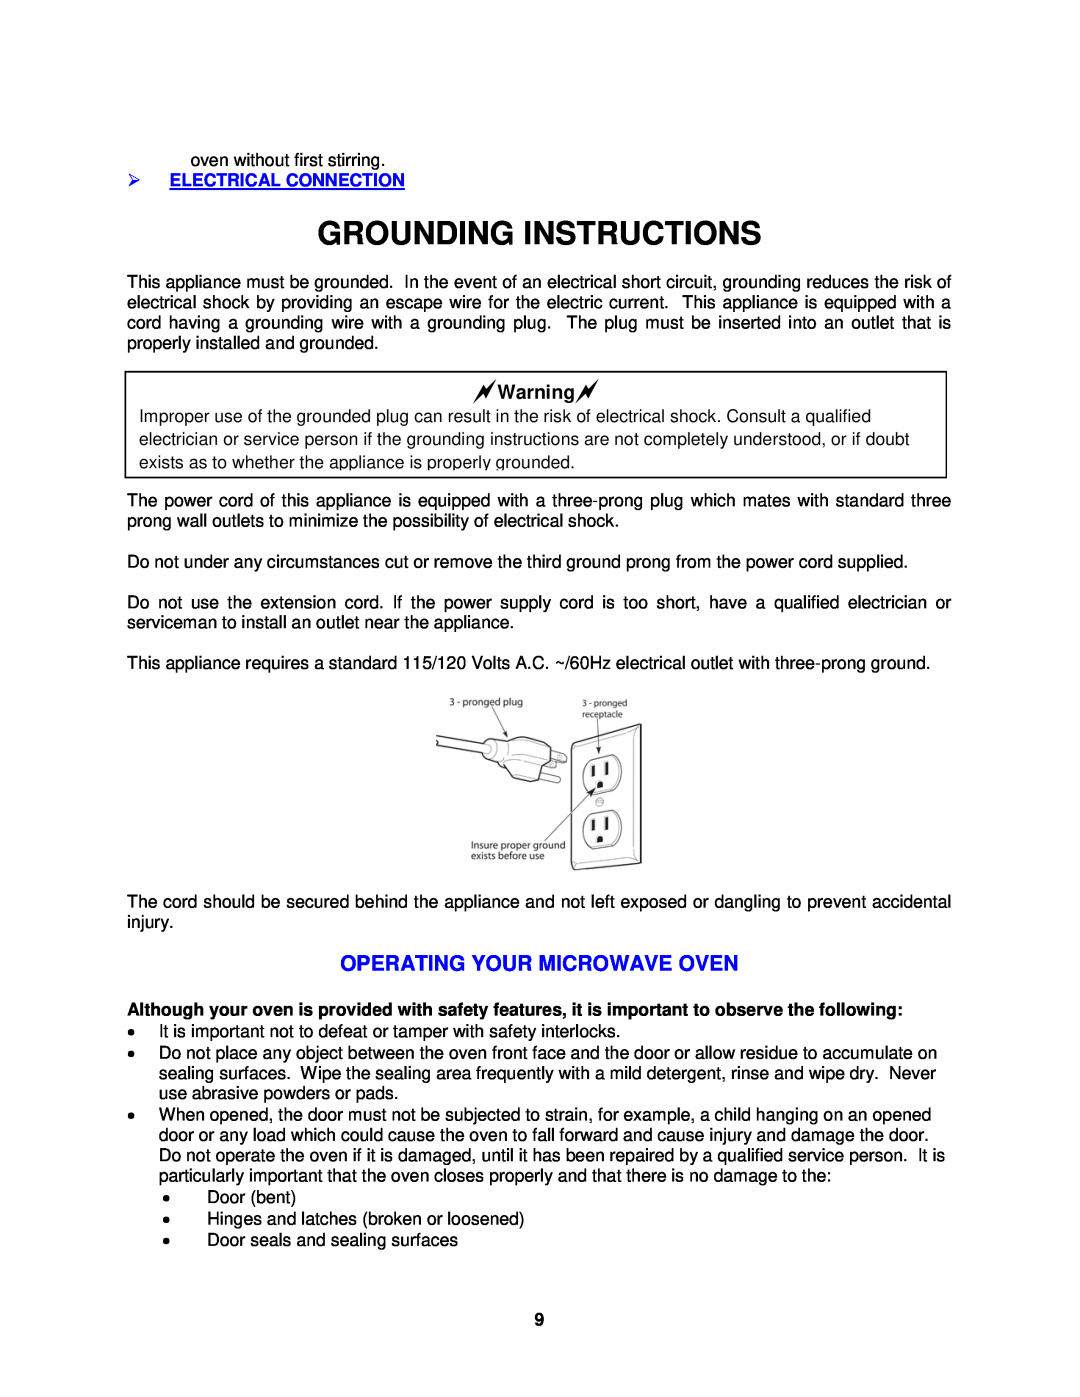 Avanti MO8003BT instruction manual Grounding Instructions, Operating Your Microwave Oven, Warning, Electrical Connection 